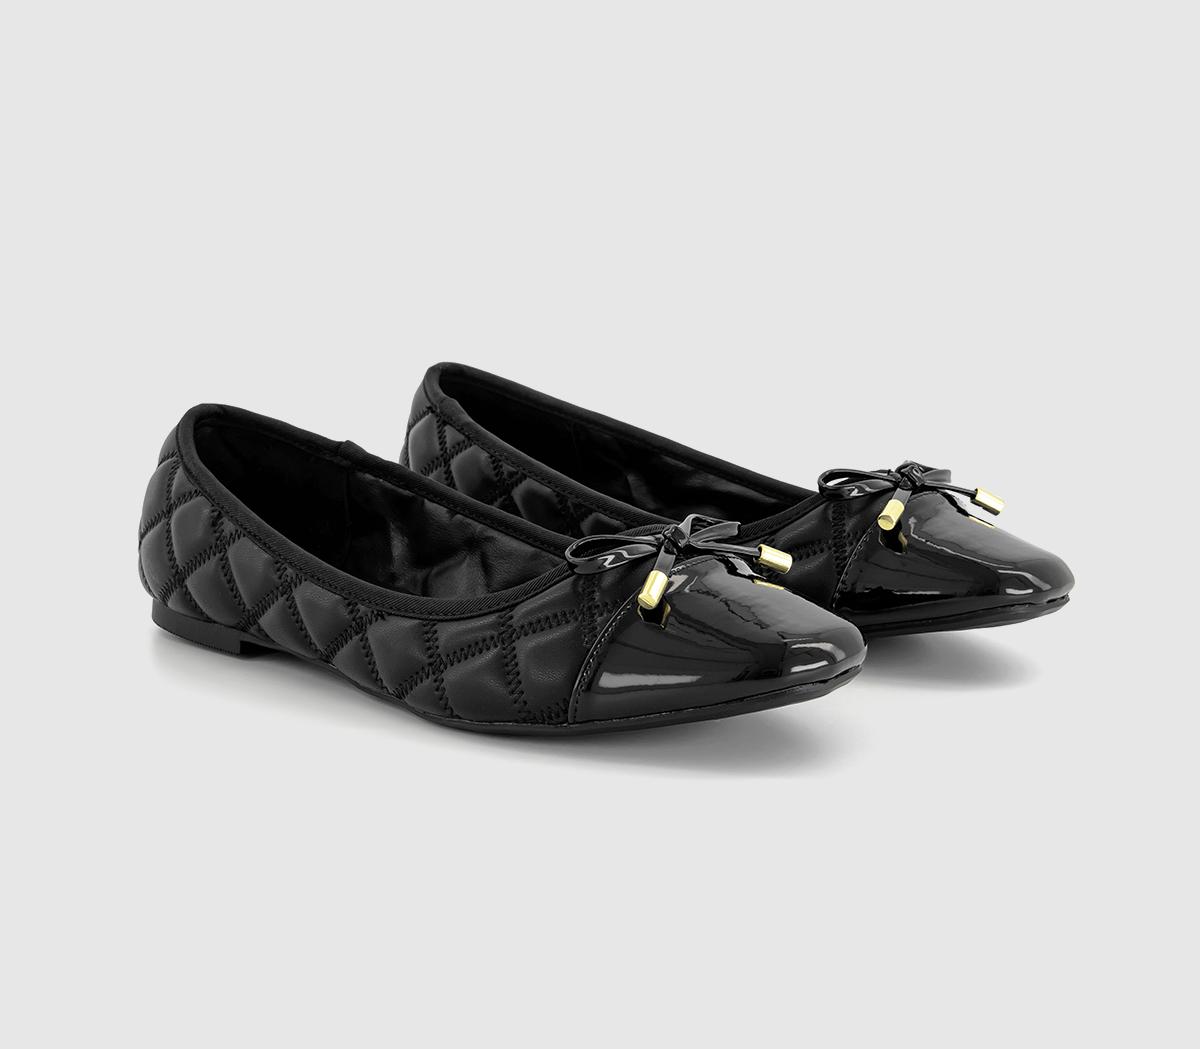 OFFICE Womens Foreveryoung Quilted Toe Cap Bow Ballerina Shoes Black, 3